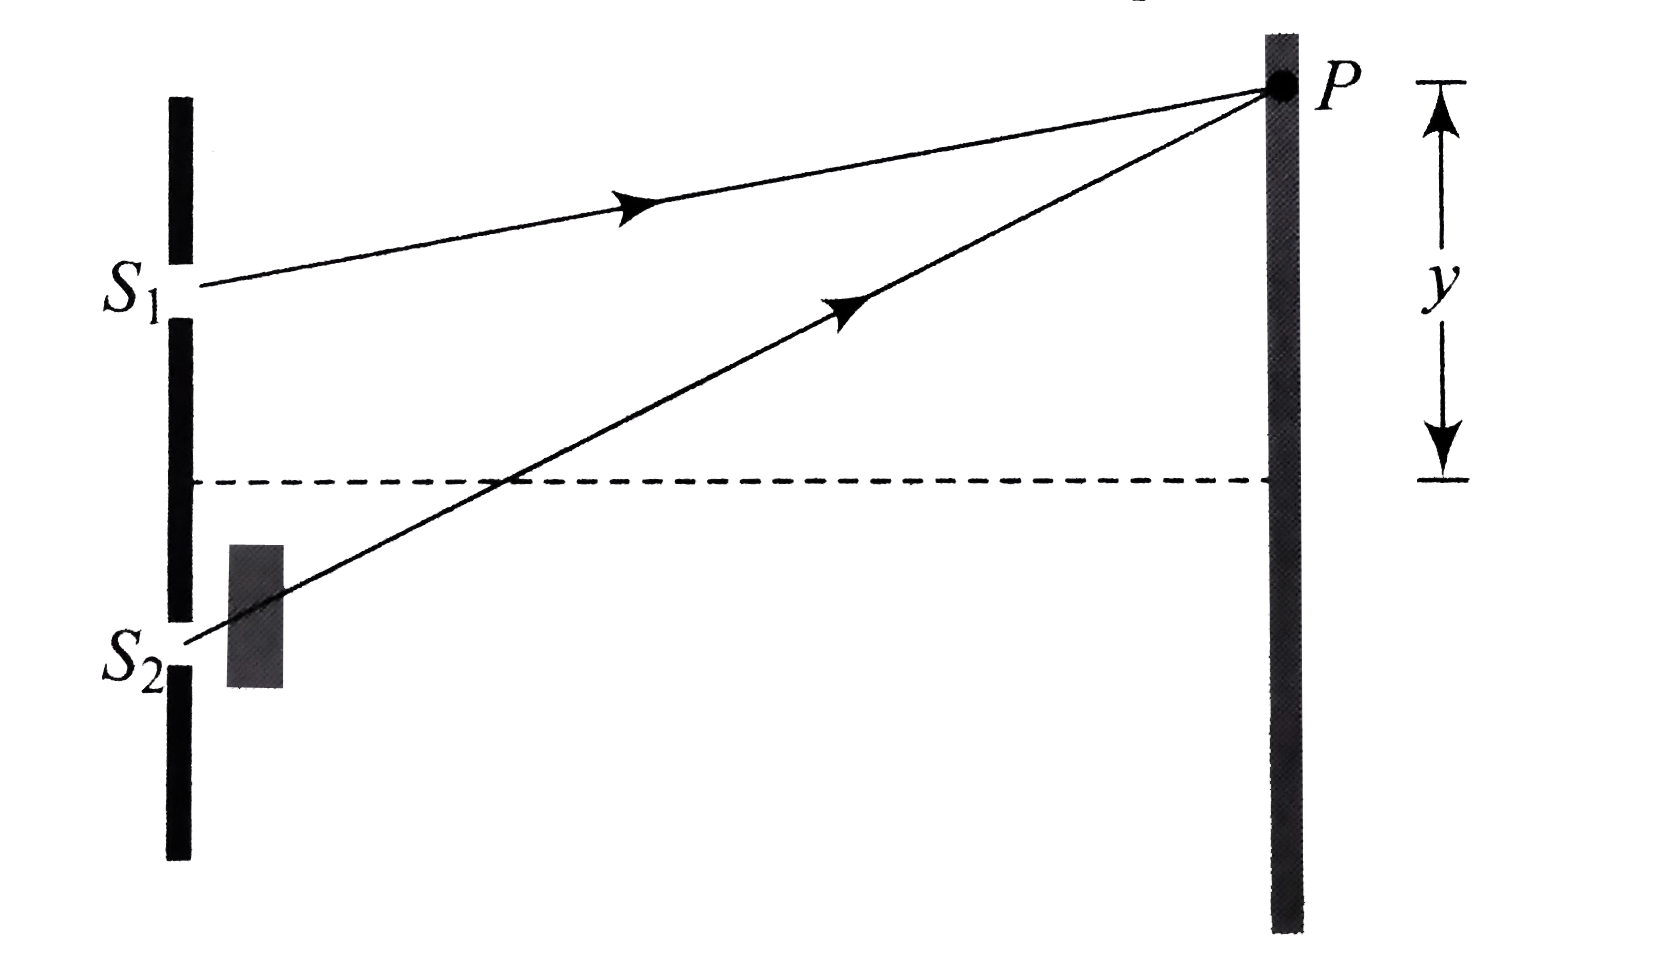 Young's double-slit experiment setup with ligth of wavelength lambda = 6000 Å, distance between two slit in 2 mm and distance between the plane of slits and the screen. Is 2 m. The slits are of equal intensity. When a sheet of glass of refractive index 1.5 (which permtis only a fraction eta of the incident light to pass through) and thickness 8000 Å is placed in front of the lower slit, it is observed that the intensity at a point P, 0.15 mm above the central maxima, does not change.      The phase difference at point P without inserting the slab is